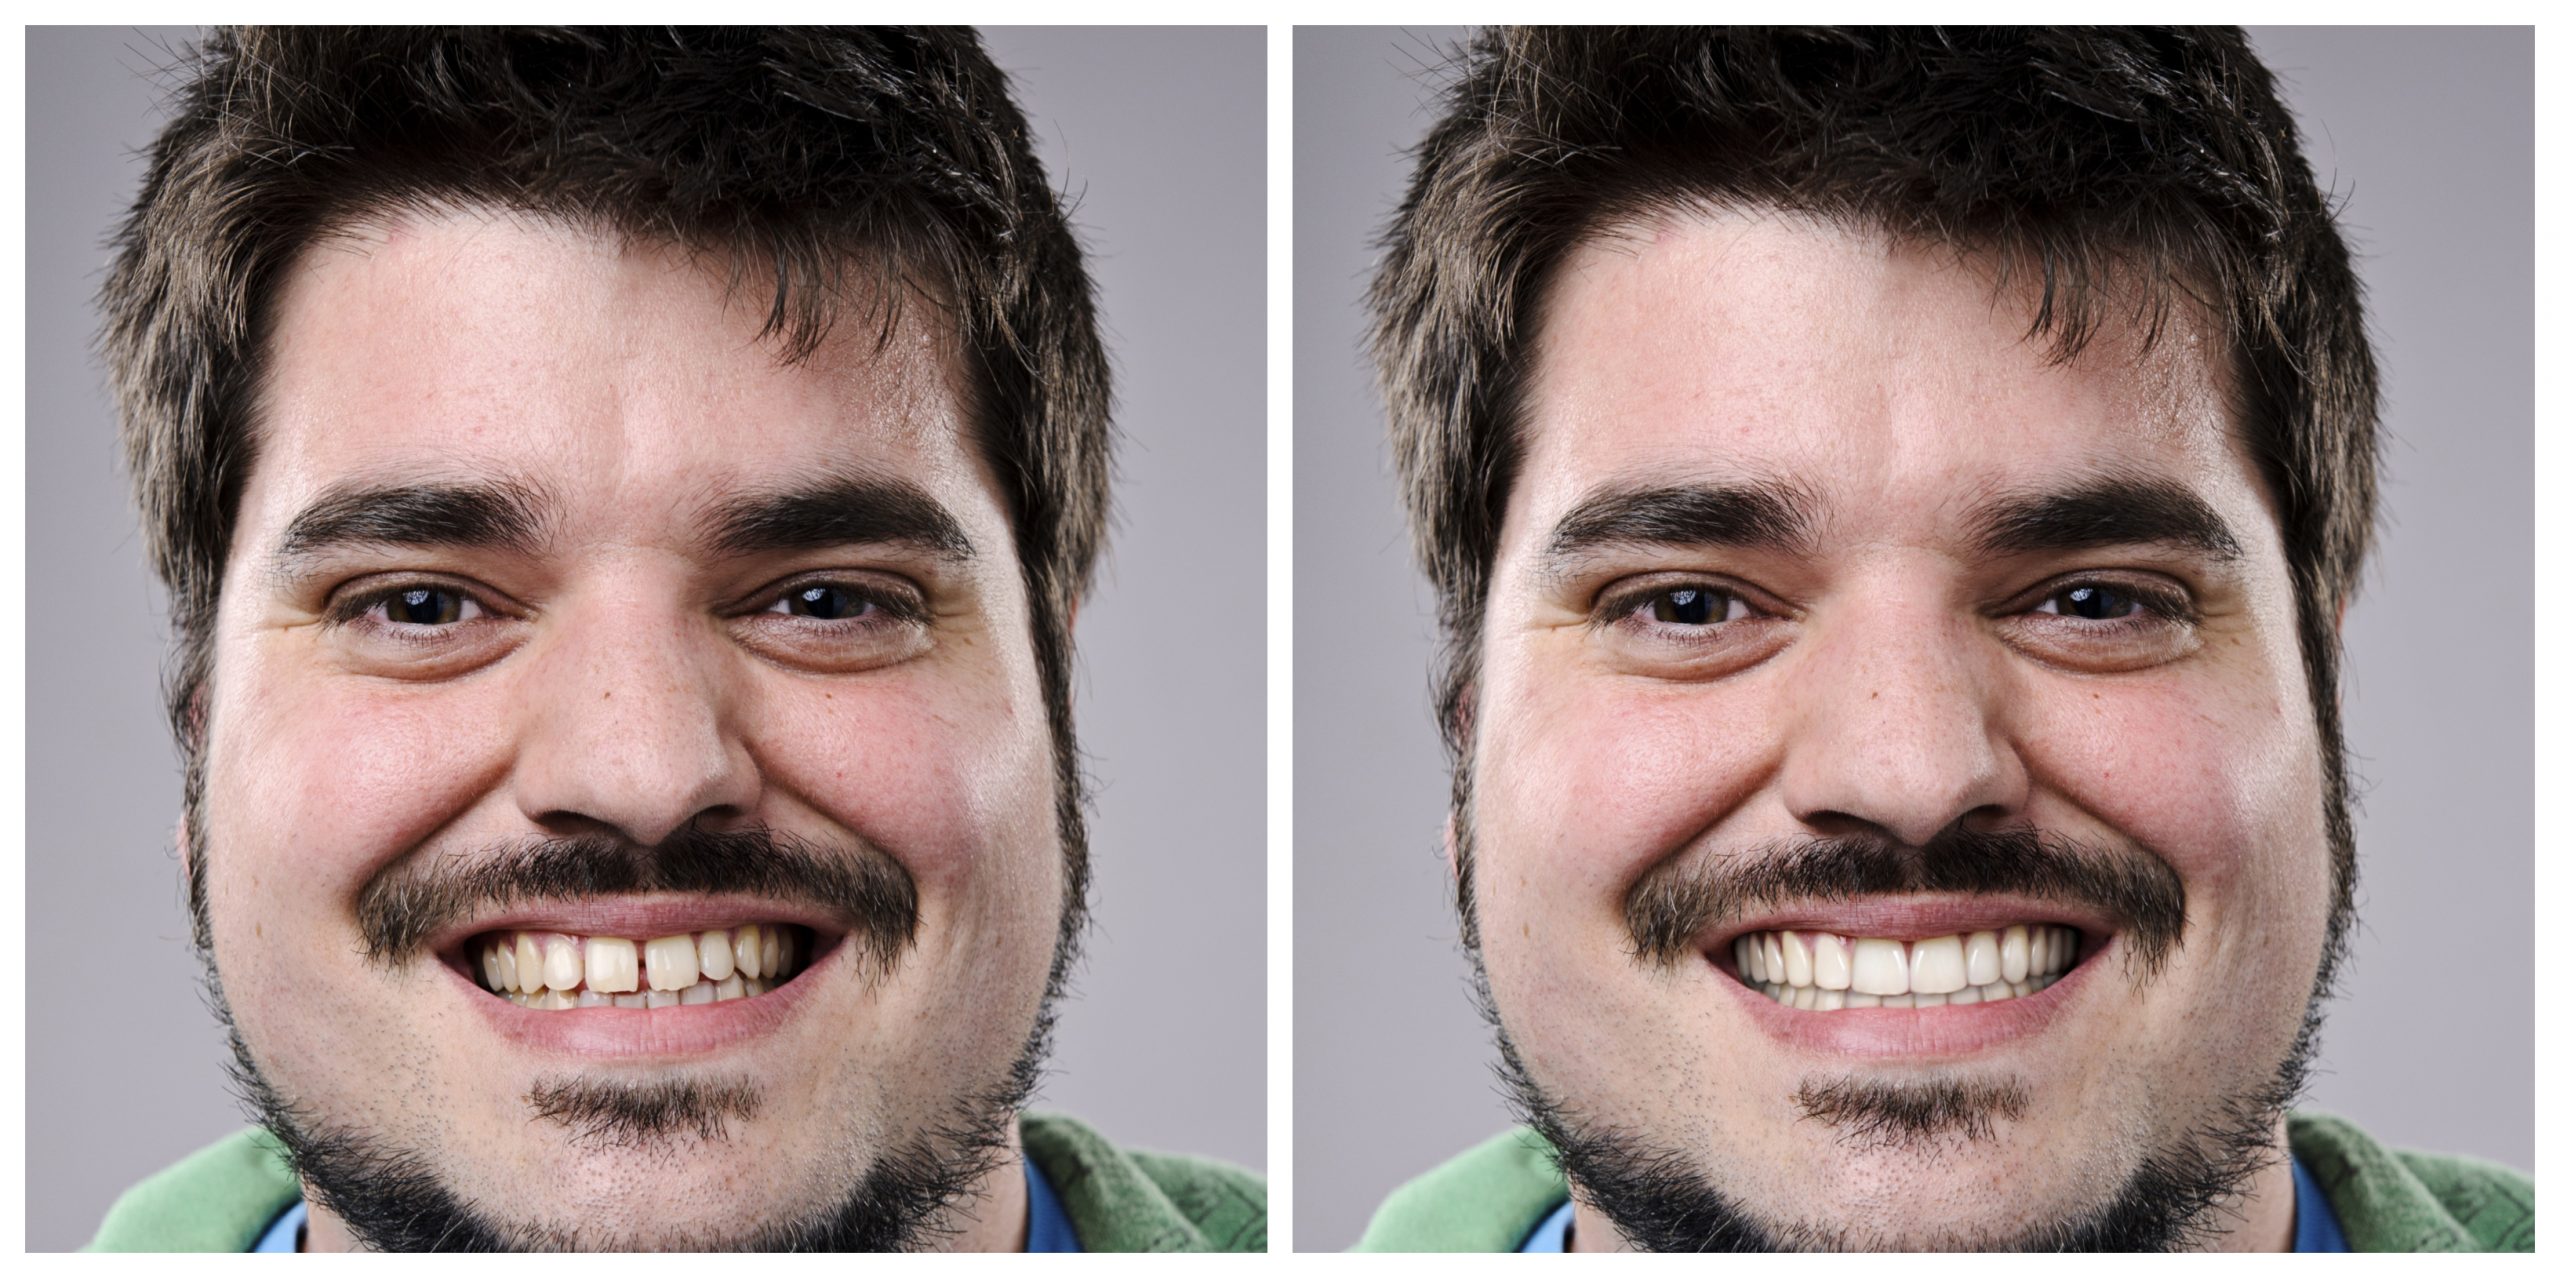 Smile Restoration - Before and After1